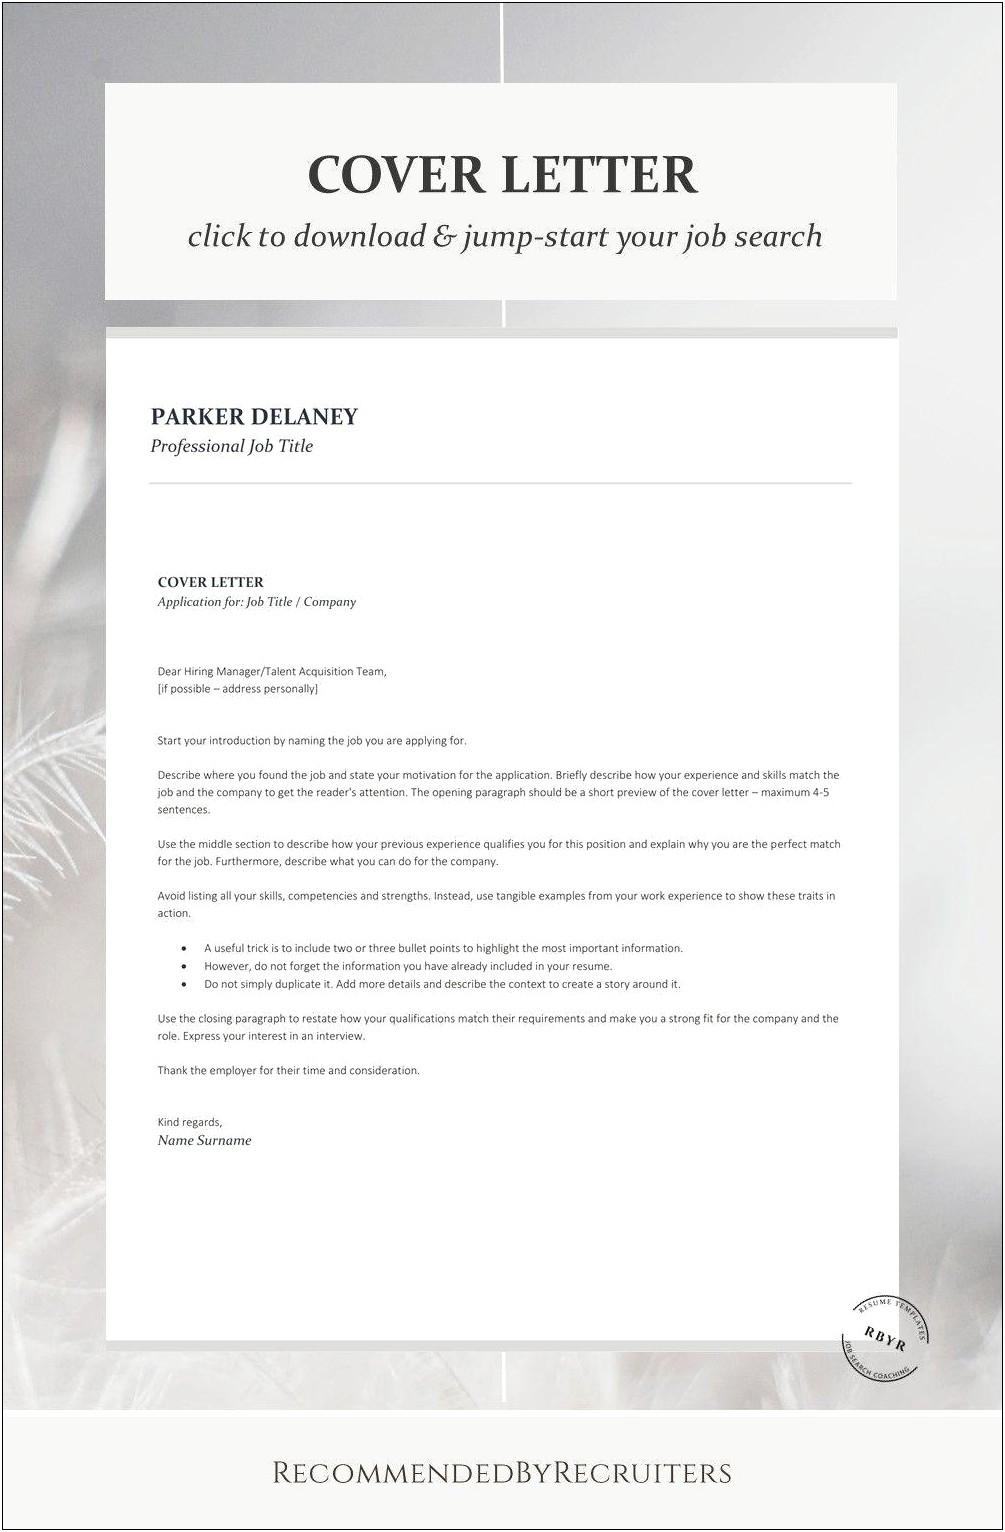 Most Effective Resumes And Cover Letter Layout